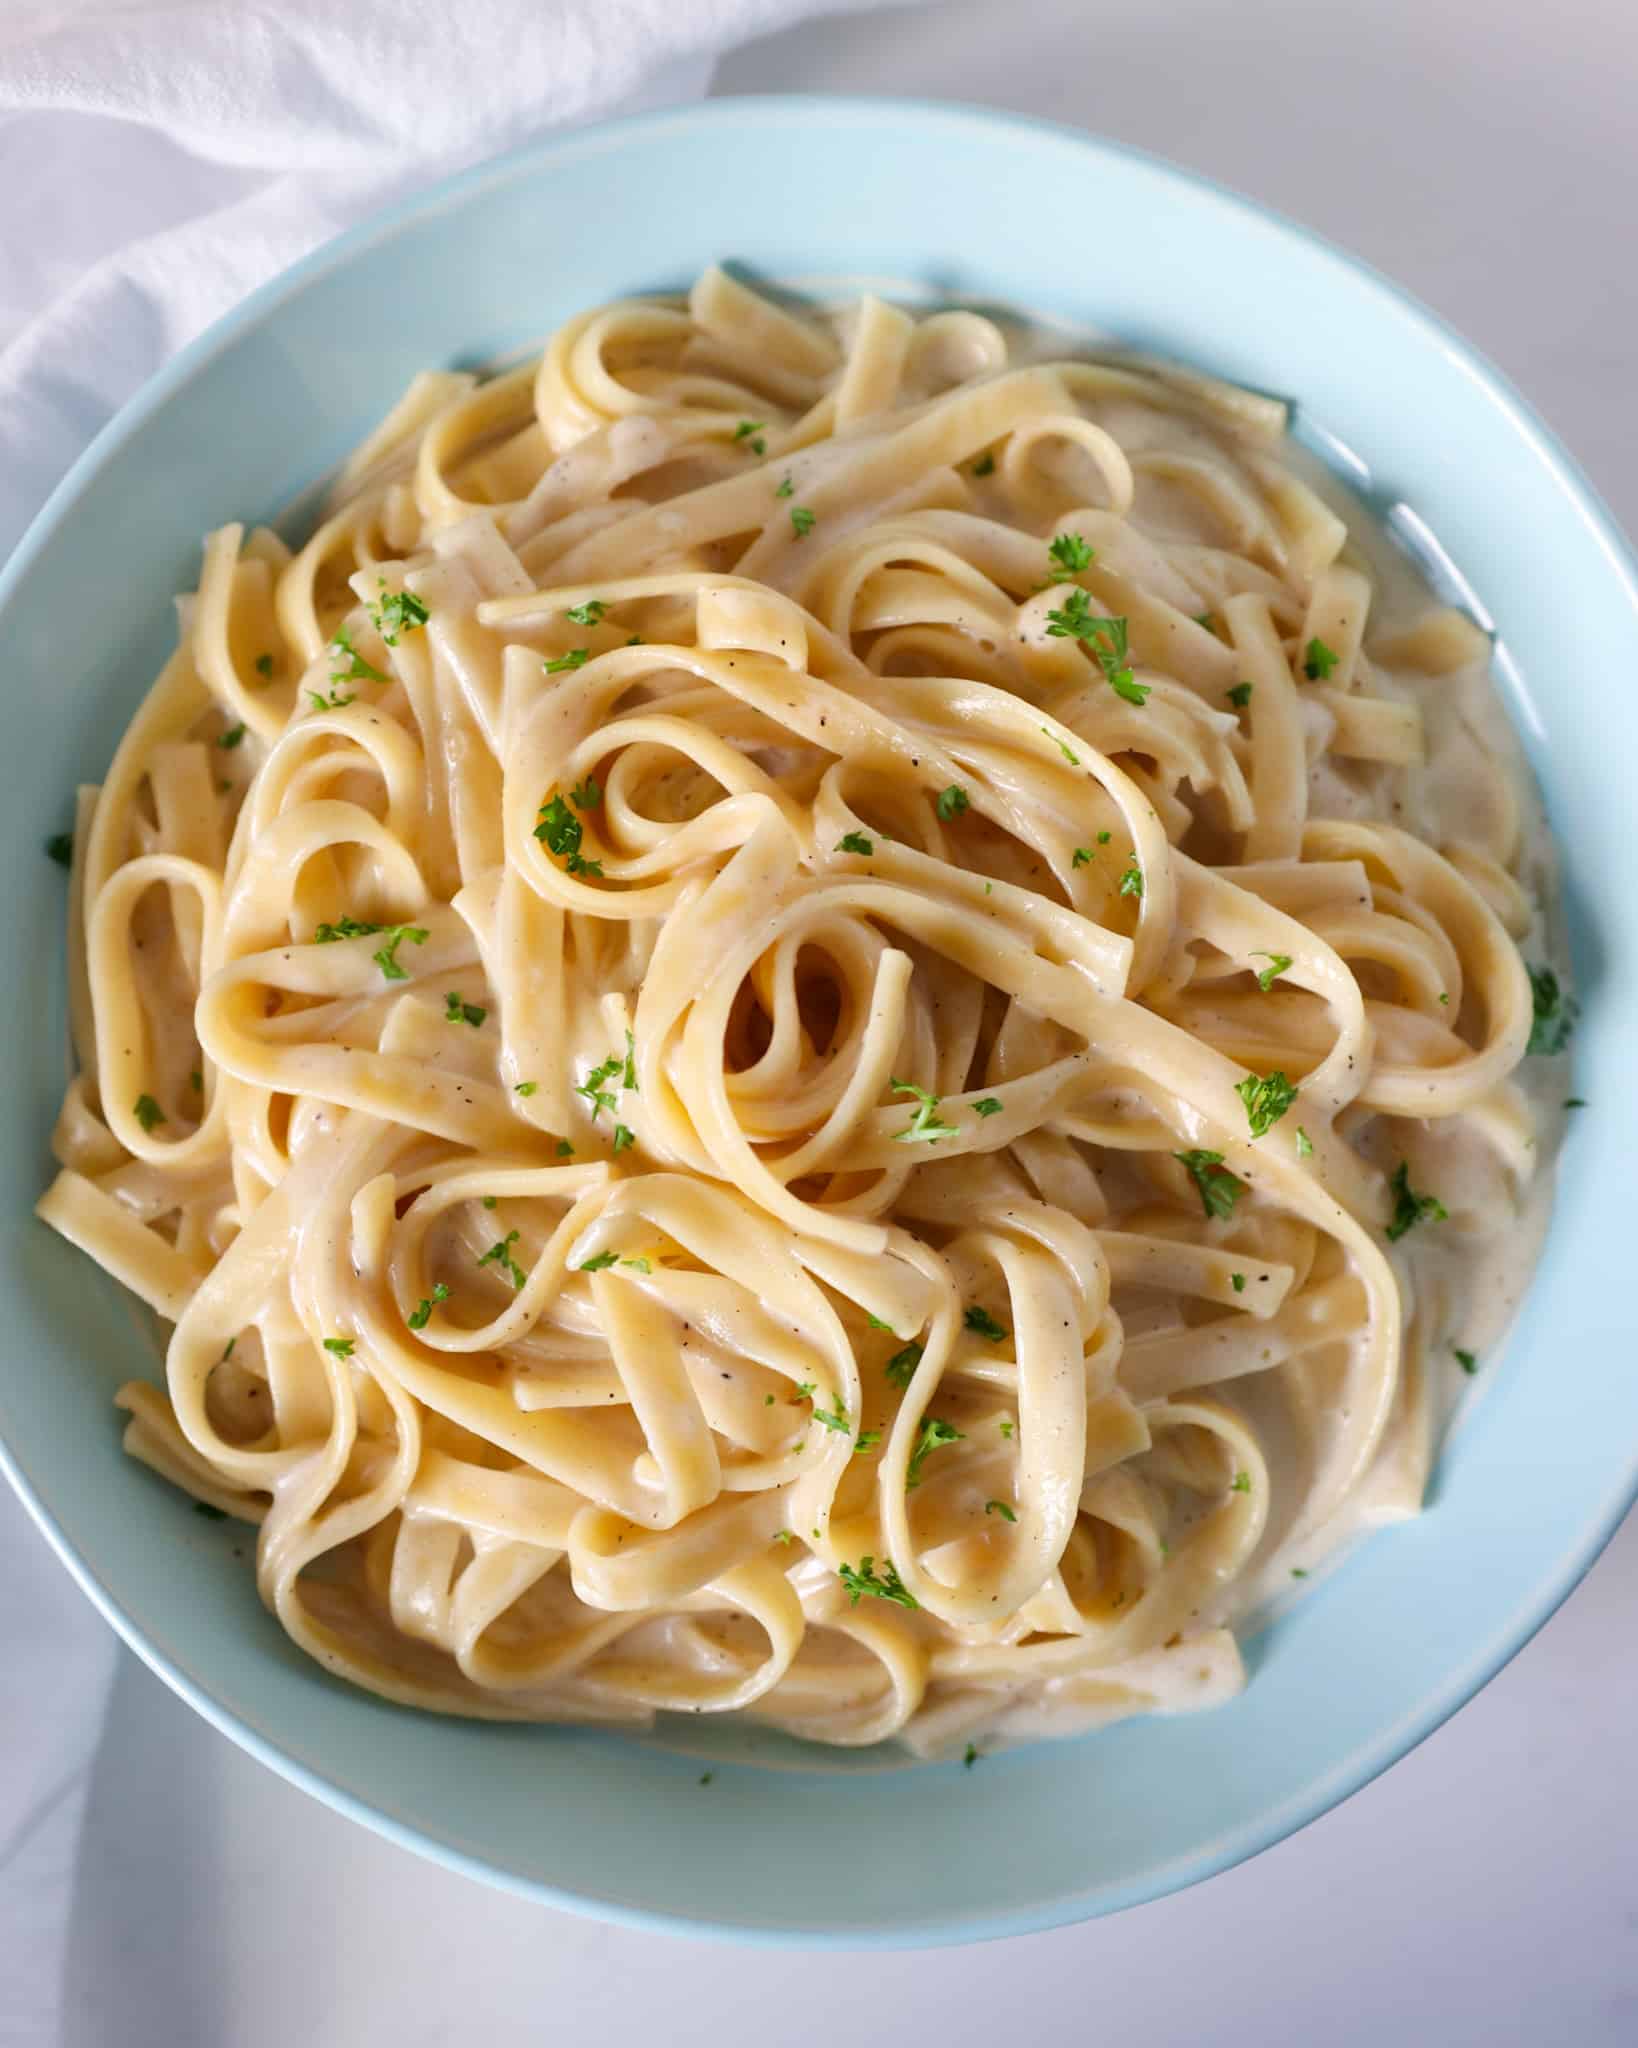 Instant pot fettuccine alfredo in a serving bowl garnished with parsley